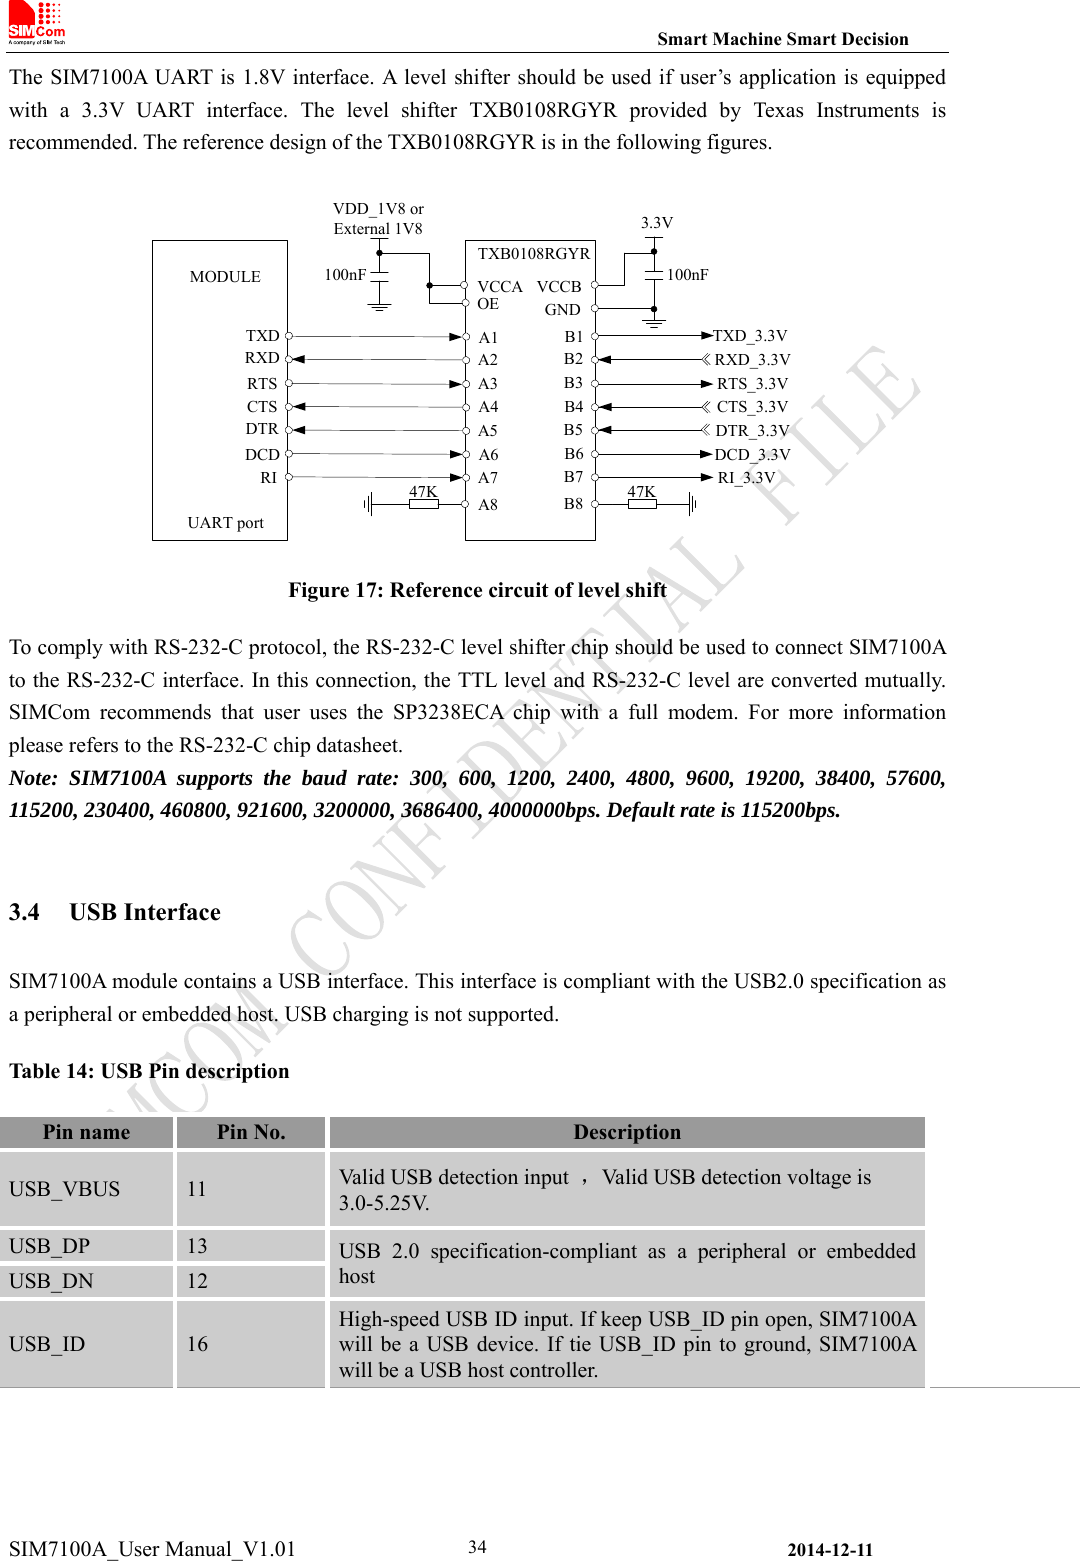                                                                Smart Machine Smart Decision SIM7100A_User Manual_V1.01                2014-12-11 34The SIM7100A UART is  1.8V interface. A level shifter should be used if user’s application is equipped with a 3.3V UART interface. The level shifter TXB0108RGYR provided  by  Texas  Instruments  is recommended. The reference design of the TXB0108RGYR is in the following figures.  TXDRXDRTSCTSDTRDCDRI A7A1A2A3A4A5A6MODULETXB0108RGYRUART portA8B7B1B2B3B4B5B6B8VCCAOEVDD_1V8 or External 1V8100nF3.3V100nFVCCBGNDTXD_3.3VRXD_3.3VRTS_3.3VCTS_3.3VDTR_3.3VDCD_3.3VRI_3.3V47K 47K  Figure 17: Reference circuit of level shift To comply with RS-232-C protocol, the RS-232-C level shifter chip should be used to connect SIM7100A to the RS-232-C interface. In this connection, the TTL level and RS-232-C level are converted mutually. SIMCom  recommends  that  user  uses  the  SP3238ECA  chip  with  a  full  modem.  For  more  information please refers to the RS-232-C chip datasheet. Note: SIM7100A supports the baud rate: 300, 600, 1200, 2400, 4800, 9600, 19200, 38400, 57600, 115200, 230400, 460800, 921600, 3200000, 3686400, 4000000bps. Default rate is 115200bps.  3.4 USB Interface SIM7100A module contains a USB interface. This interface is compliant with the USB2.0 specification as a peripheral or embedded host. USB charging is not supported. Table 14: USB Pin description Pin name  Pin No.  Description USB_VBUS  11  Valid USB detection input  ，Valid USB detection voltage is 3.0-5.25V. USB_DP  13  USB  2.0  specification-compliant  as  a  peripheral  or  embedded host USB_DN  12 USB_ID  16 High-speed USB ID input. If keep USB_ID pin open, SIM7100A will be a USB  device.  If  tie USB_ID  pin to  ground, SIM7100A will be a USB host controller.   